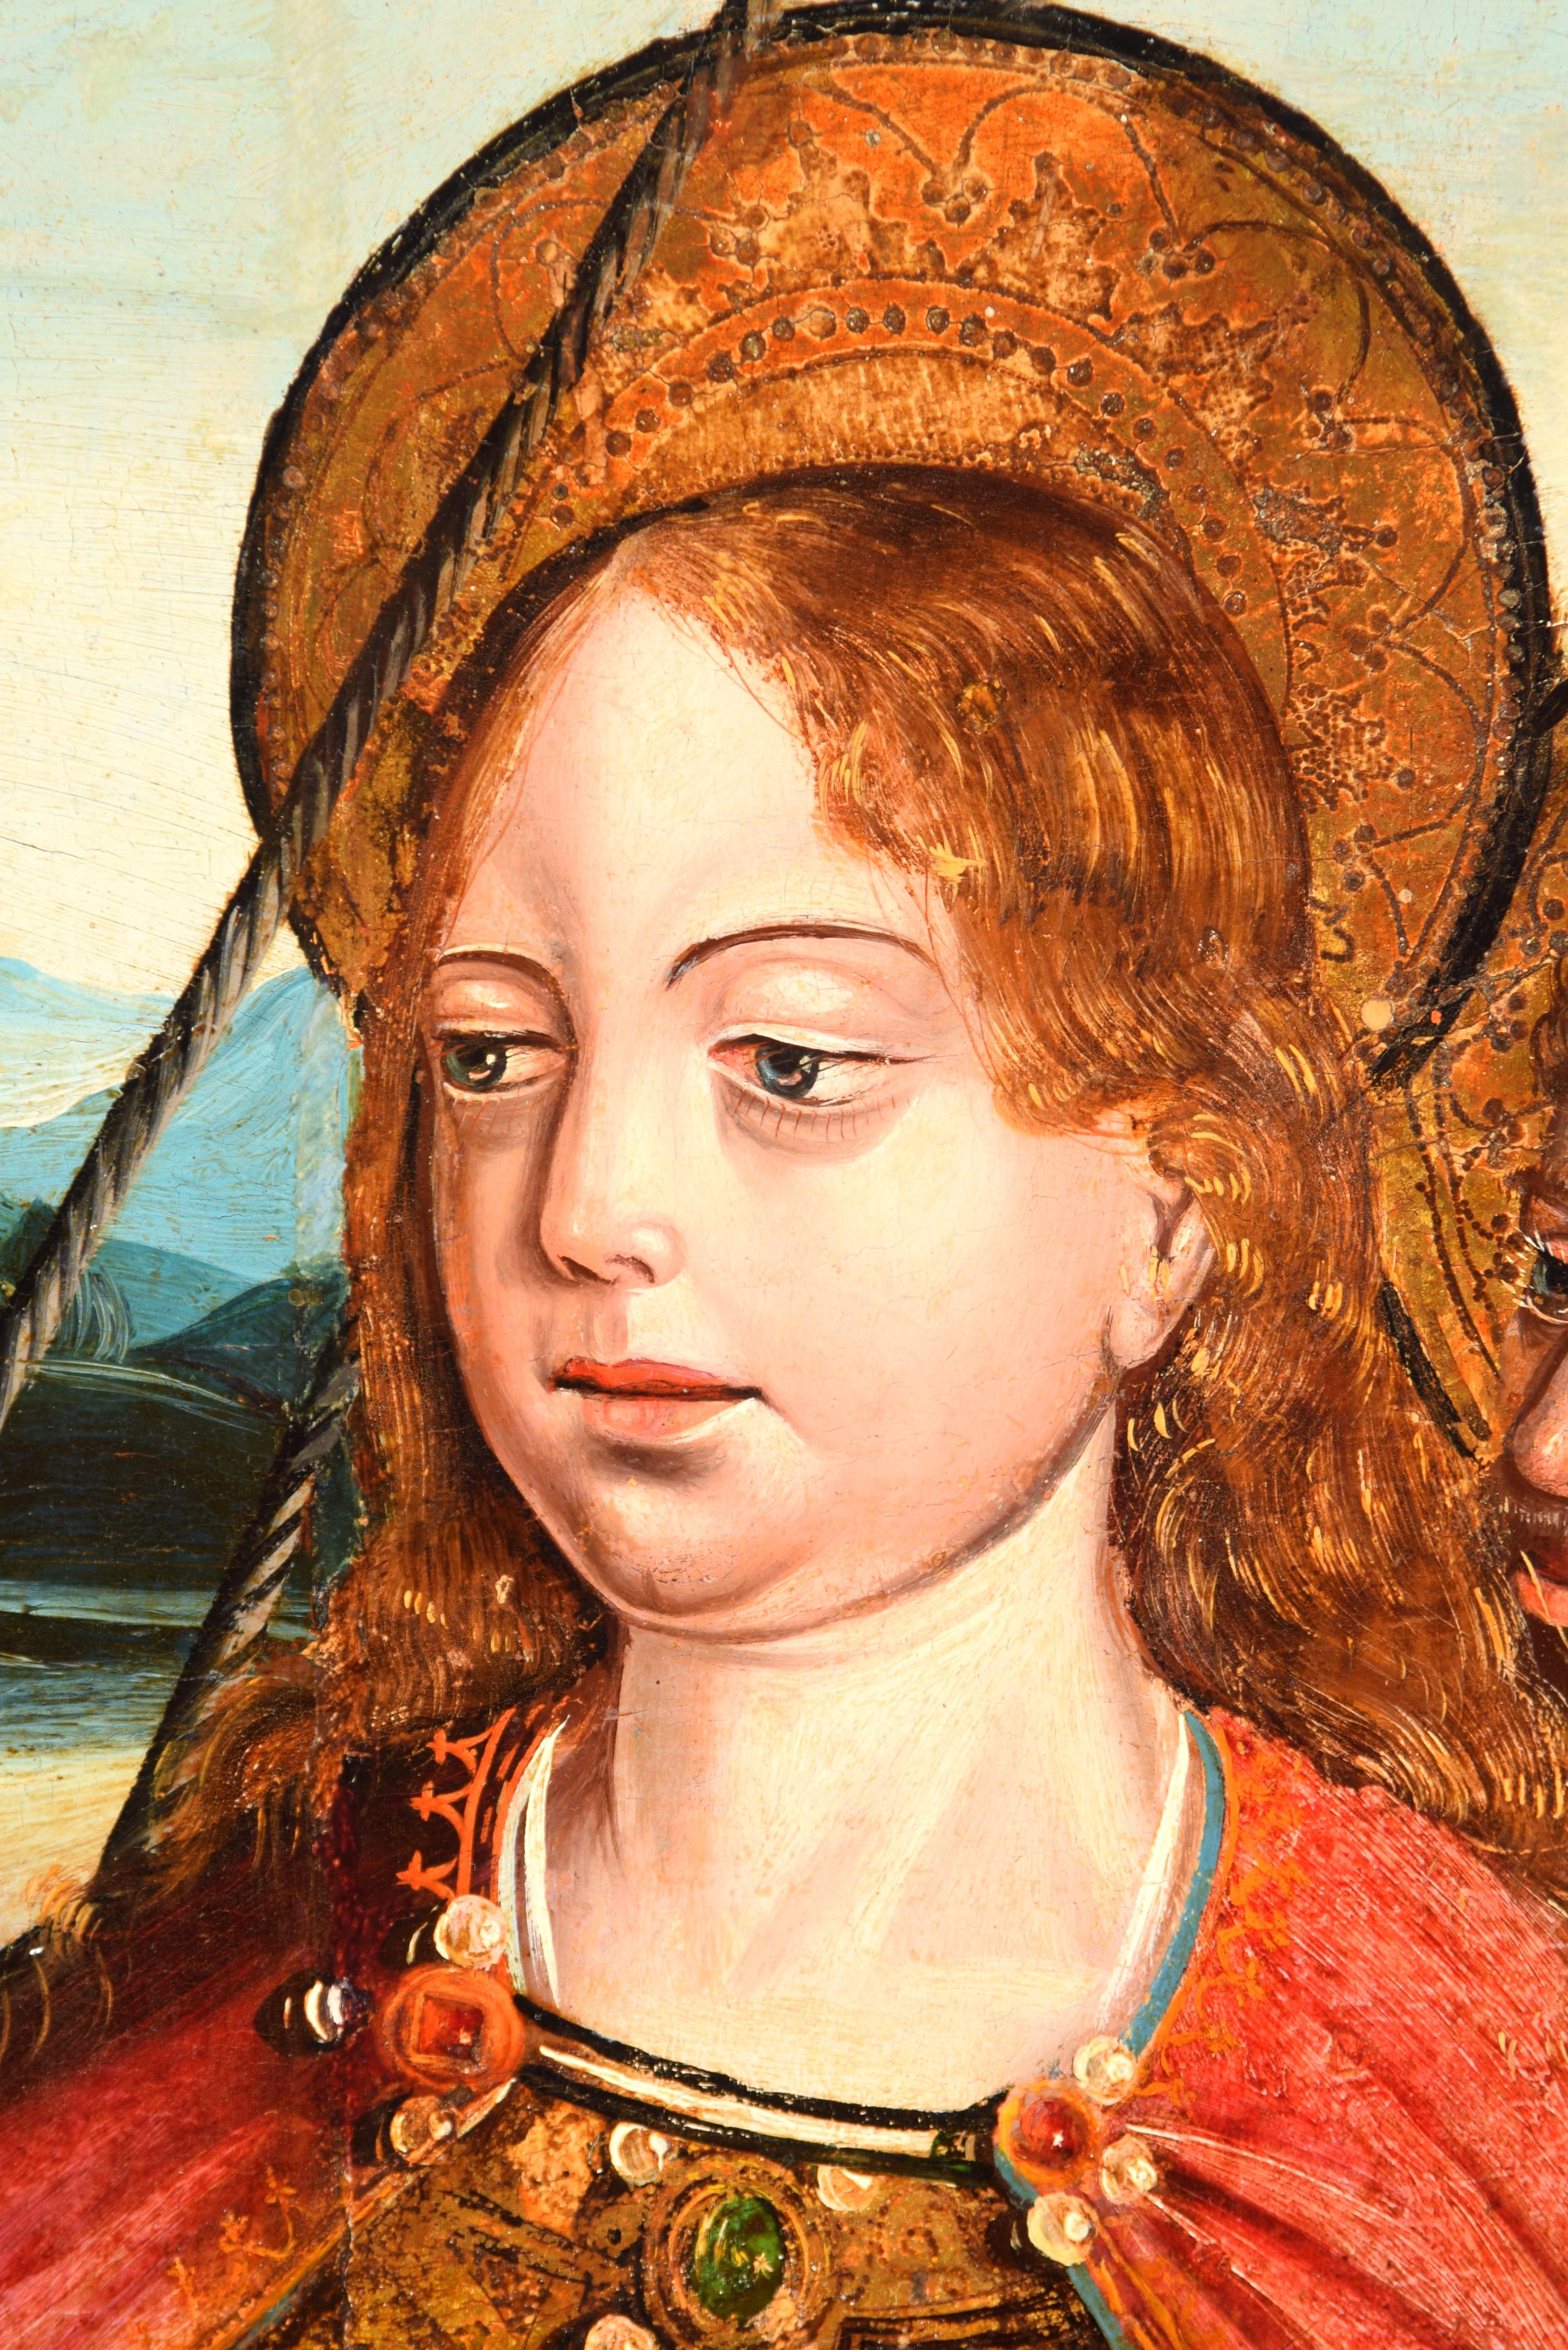 Gothic Mary Magdalene on her way to Marseille. Castilian school, 15th century. For Sale